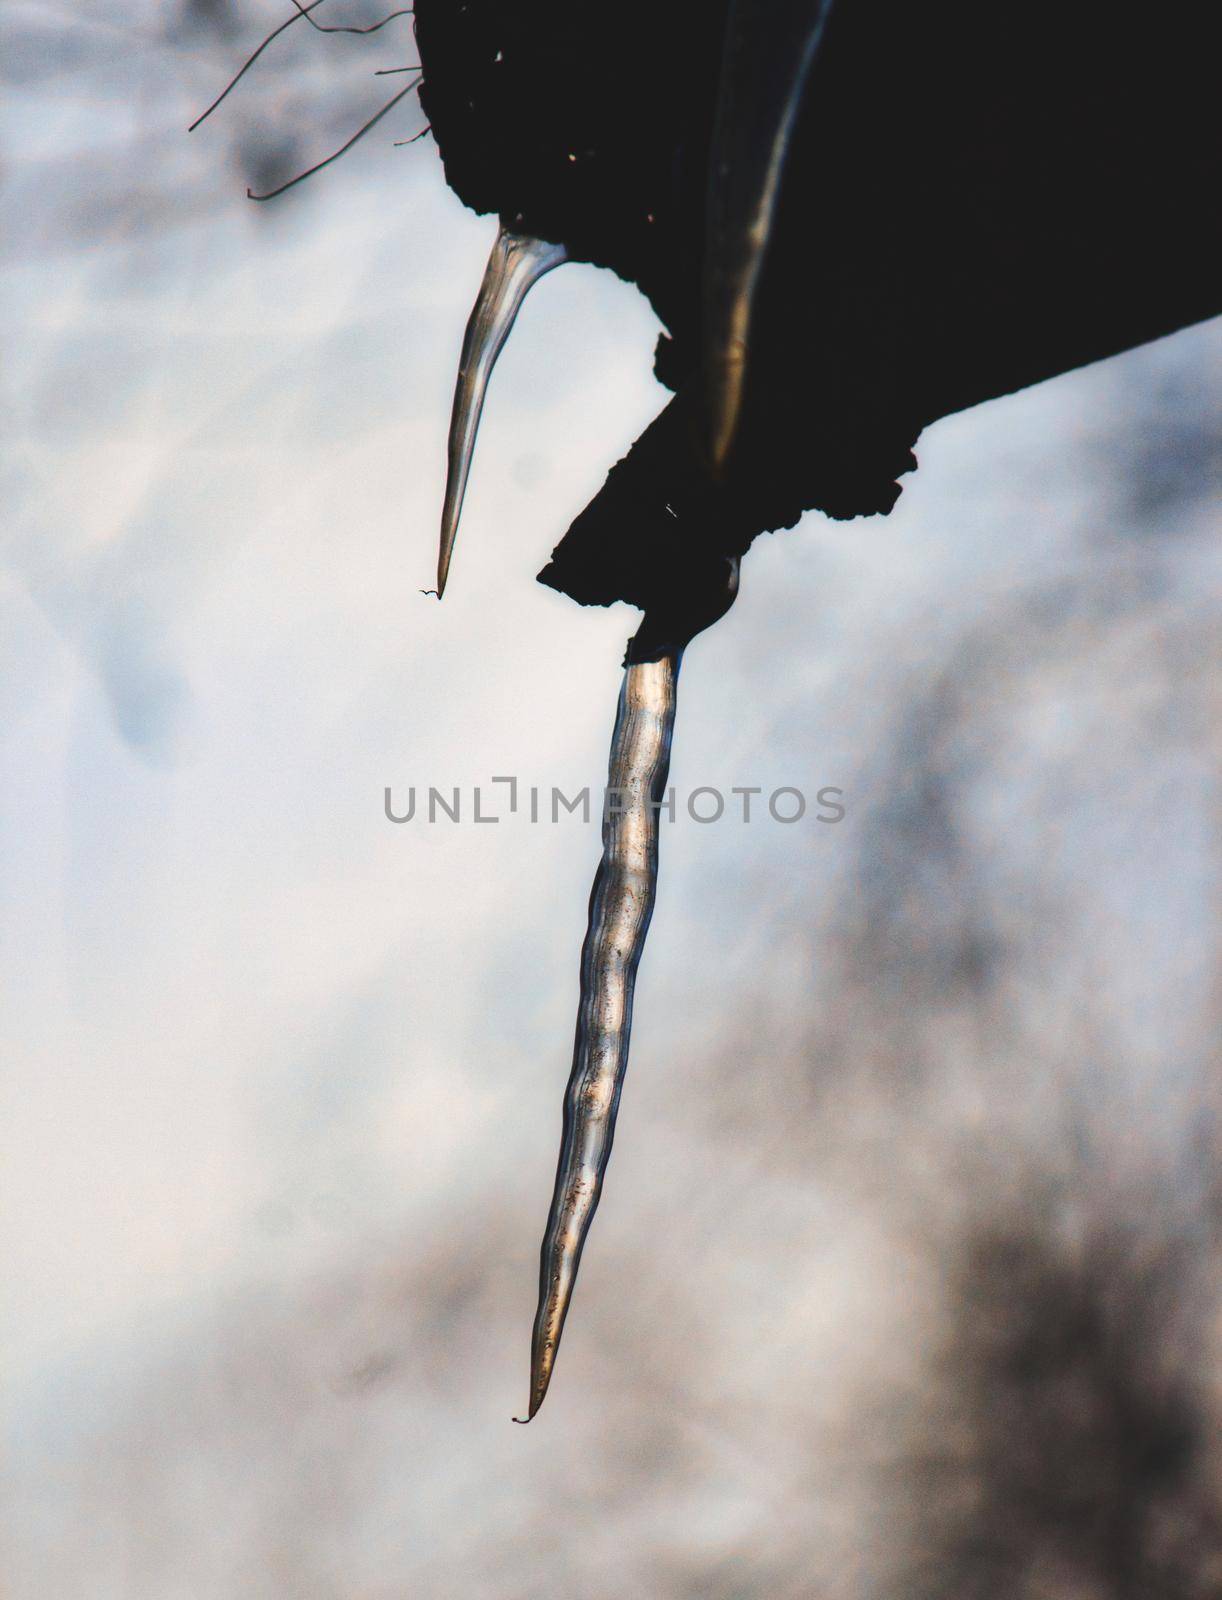 Frozen icicles hanging from a tree in the forest